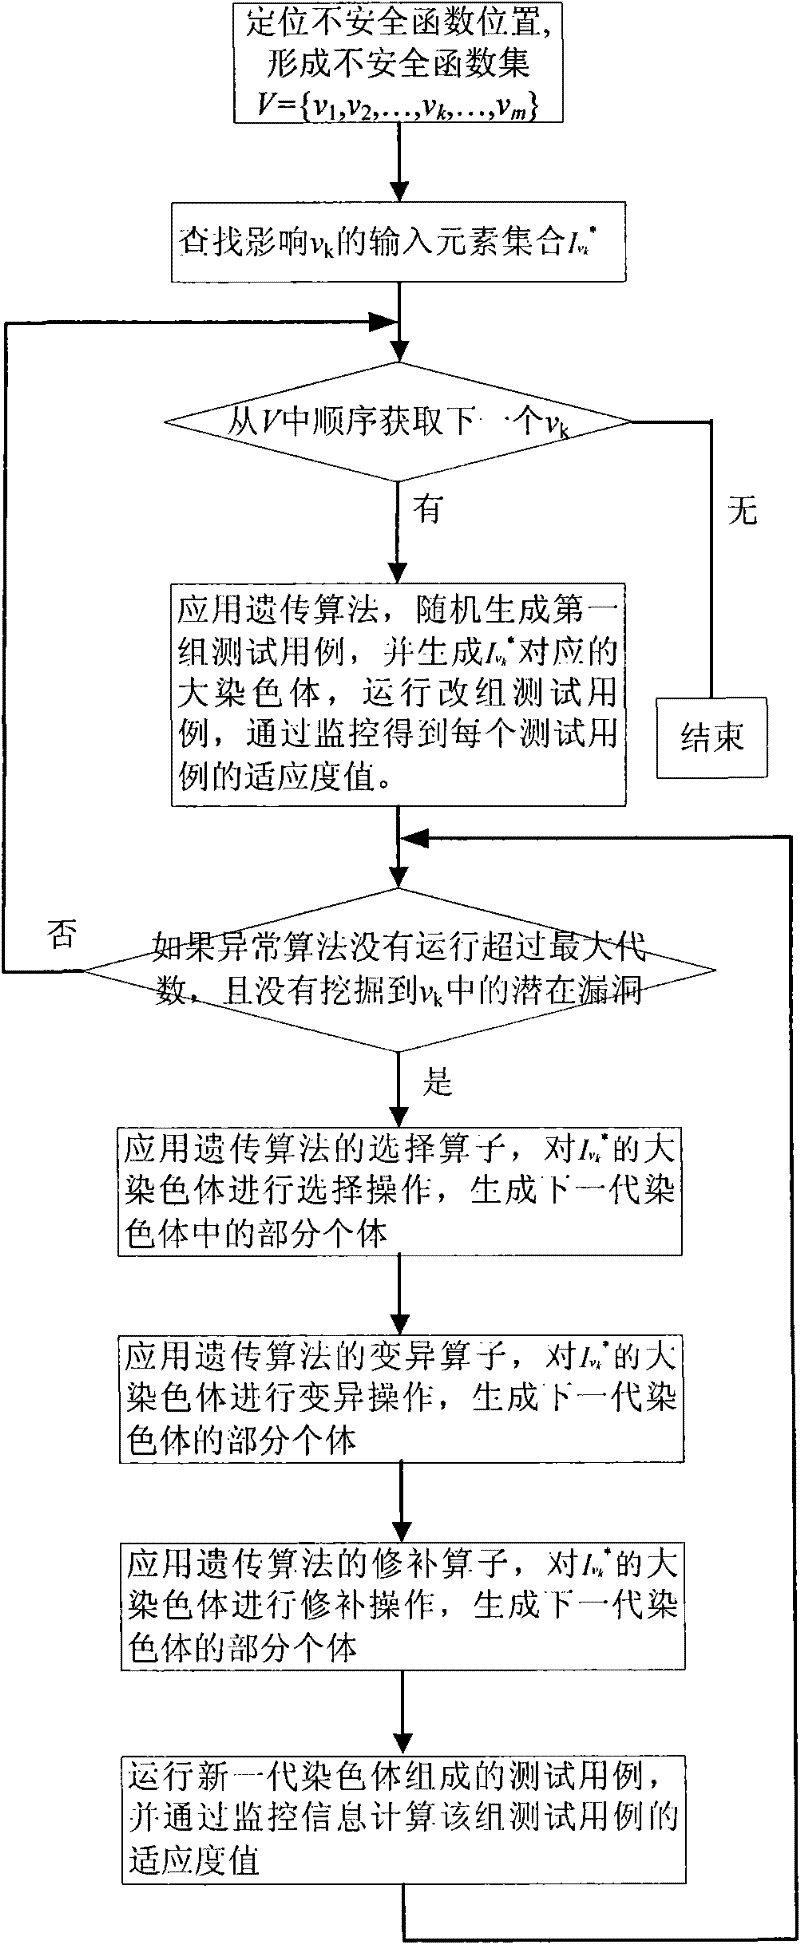 Software vulnerability analysis method of variant multi-dimensional input based on Fuzzing technology